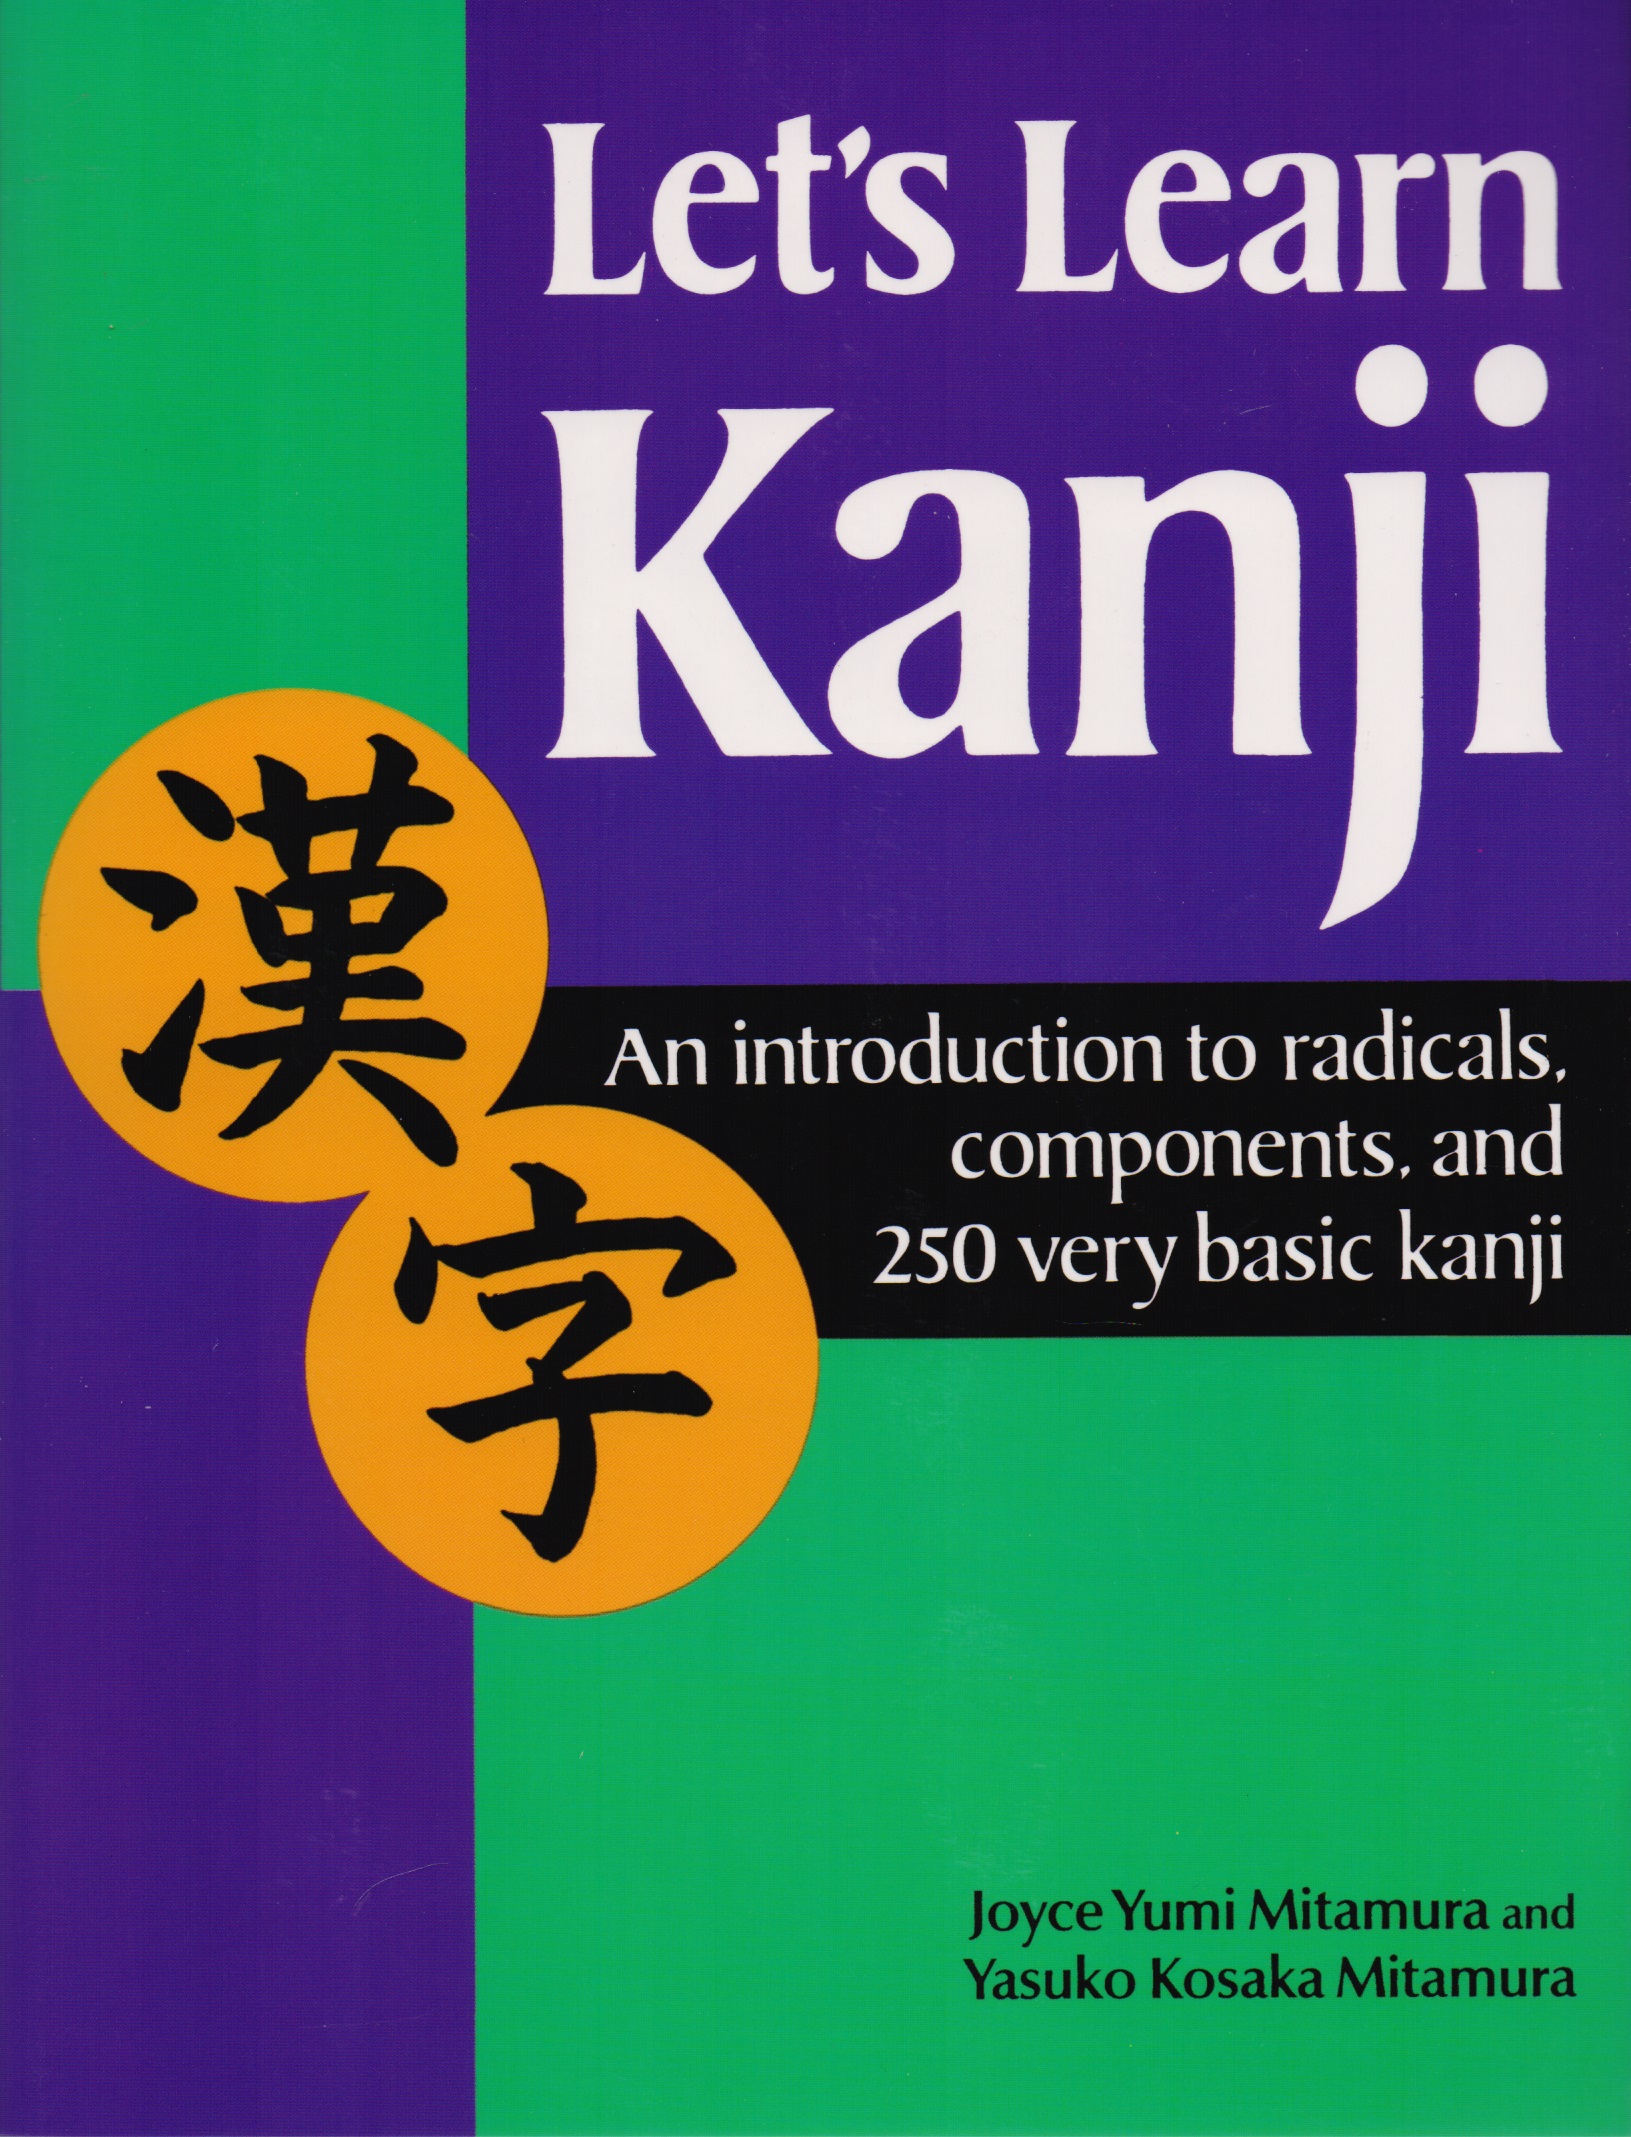 Lets Learn Kanji: An Introduction to Radicals, Components and 250 Very Basic Kanji  conning a s the kodansha kanji learner s course a step by step guide to mastering 2300 characters